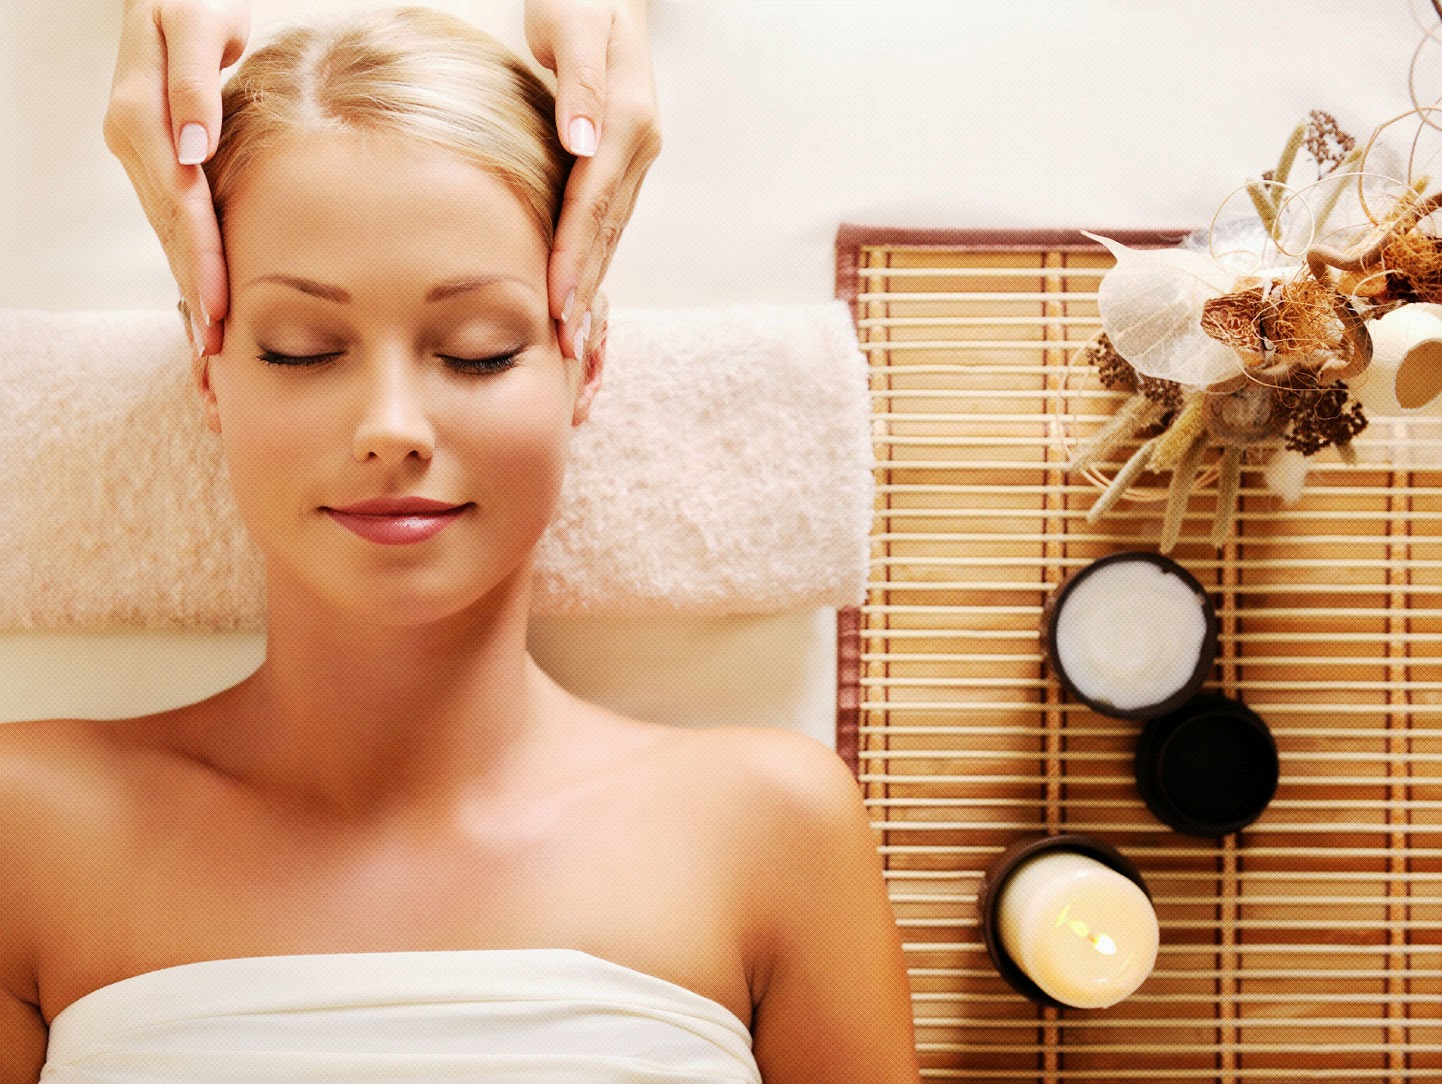 The Fizz Facial: A Great Mother's Day Treat!